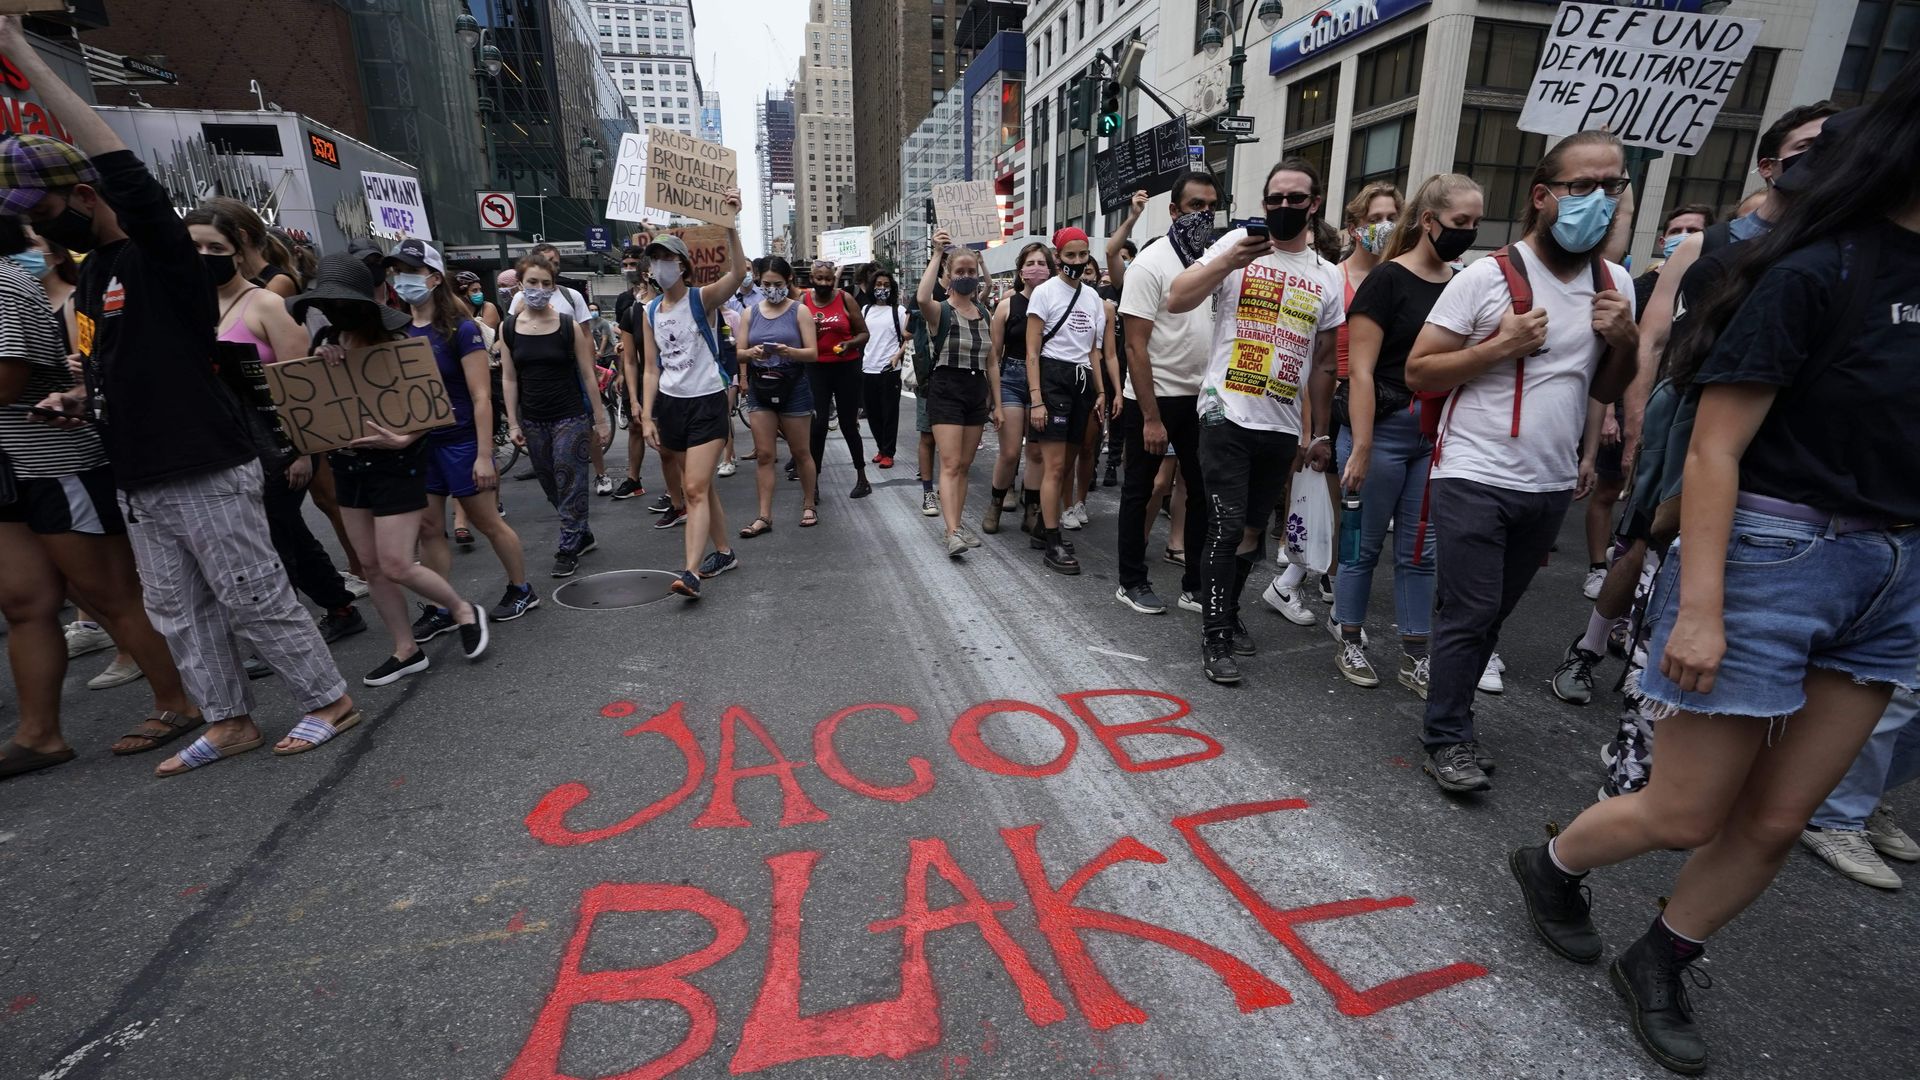 Demonstrators march through the city during a protest in New York August 24